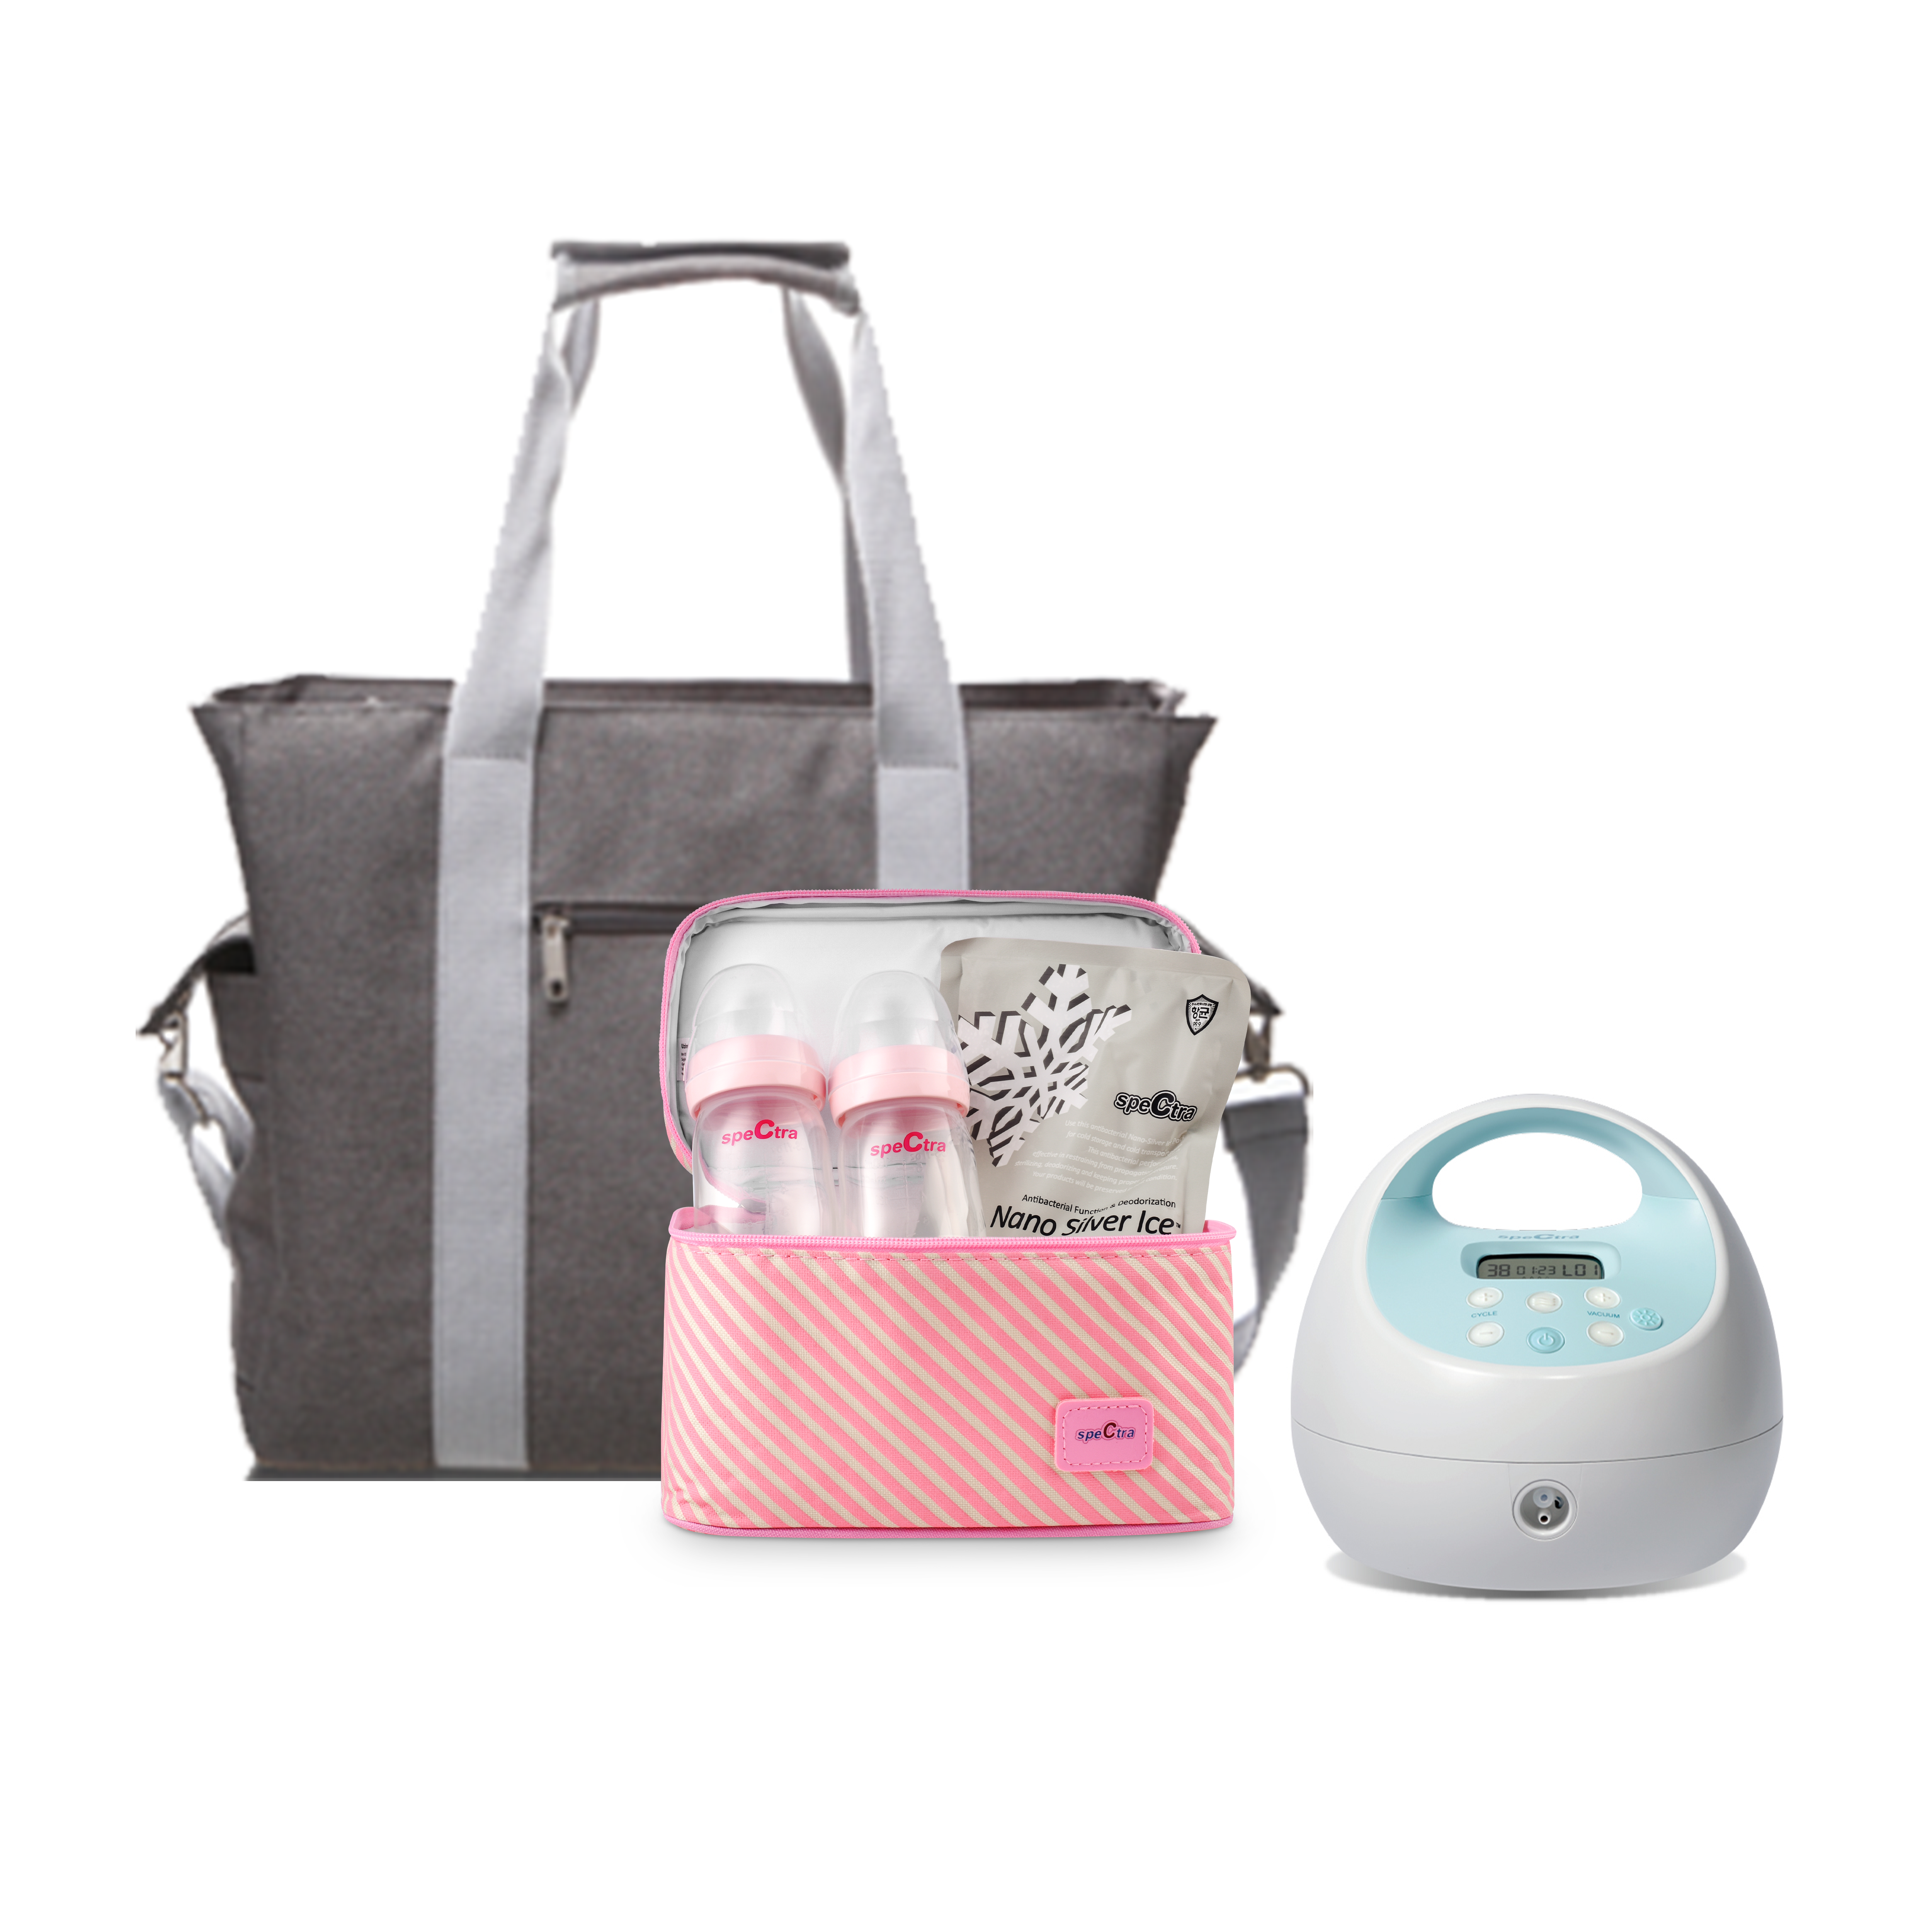 Spectra S1 Plus Portable & Rechargeable Electric Breast Pump with